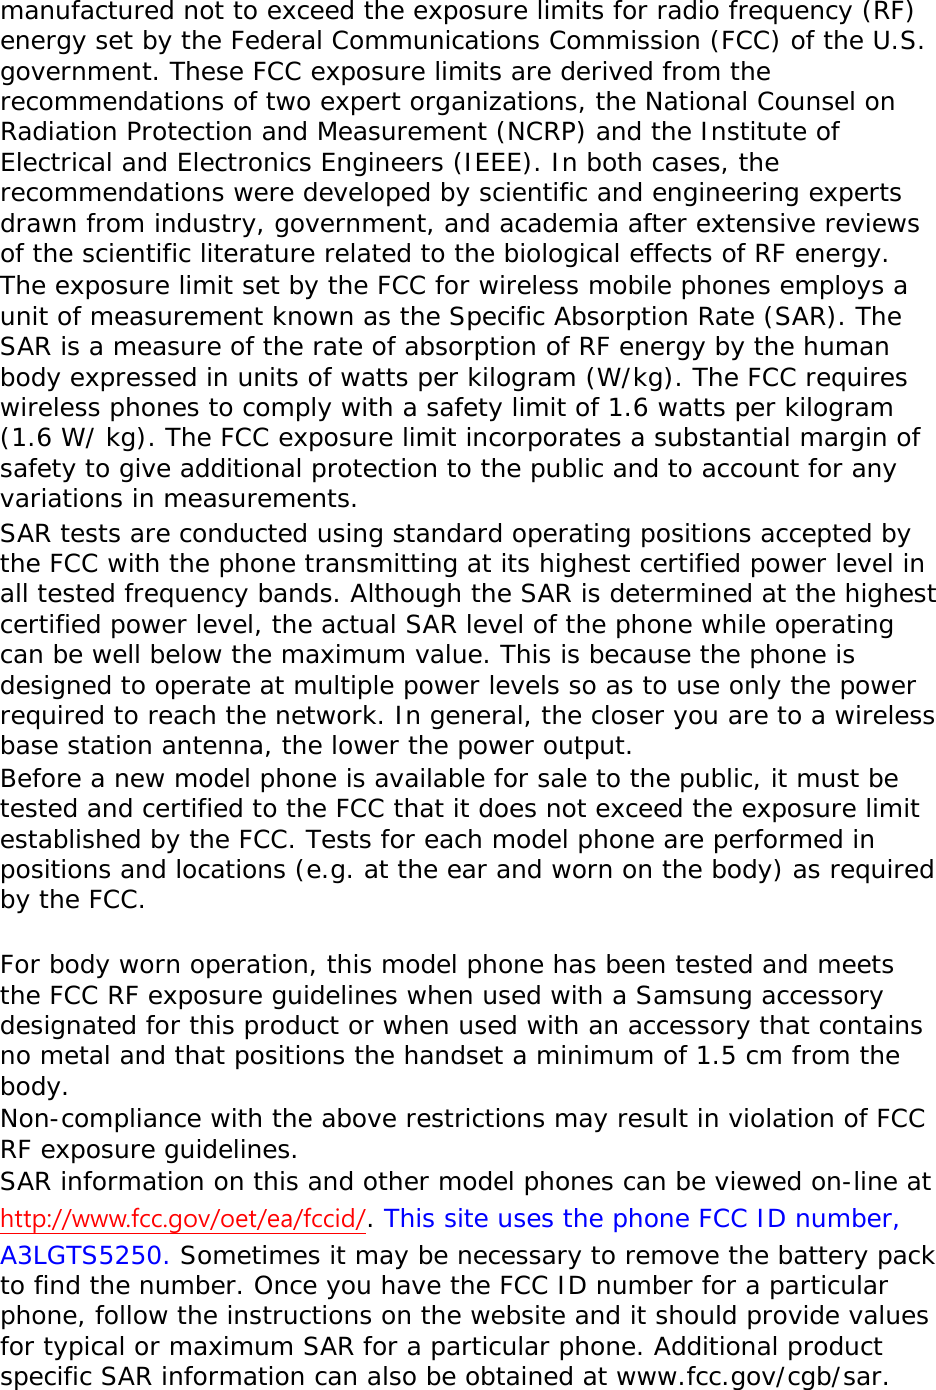 manufactured not to exceed the exposure limits for radio frequency (RF) energy set by the Federal Communications Commission (FCC) of the U.S. government. These FCC exposure limits are derived from the recommendations of two expert organizations, the National Counsel on Radiation Protection and Measurement (NCRP) and the Institute of Electrical and Electronics Engineers (IEEE). In both cases, the recommendations were developed by scientific and engineering experts drawn from industry, government, and academia after extensive reviews of the scientific literature related to the biological effects of RF energy. The exposure limit set by the FCC for wireless mobile phones employs a unit of measurement known as the Specific Absorption Rate (SAR). The SAR is a measure of the rate of absorption of RF energy by the human body expressed in units of watts per kilogram (W/kg). The FCC requires wireless phones to comply with a safety limit of 1.6 watts per kilogram (1.6 W/ kg). The FCC exposure limit incorporates a substantial margin of safety to give additional protection to the public and to account for any variations in measurements. SAR tests are conducted using standard operating positions accepted by the FCC with the phone transmitting at its highest certified power level in all tested frequency bands. Although the SAR is determined at the highest certified power level, the actual SAR level of the phone while operating can be well below the maximum value. This is because the phone is designed to operate at multiple power levels so as to use only the power required to reach the network. In general, the closer you are to a wireless base station antenna, the lower the power output. Before a new model phone is available for sale to the public, it must be tested and certified to the FCC that it does not exceed the exposure limit established by the FCC. Tests for each model phone are performed in positions and locations (e.g. at the ear and worn on the body) as required by the FCC.    For body worn operation, this model phone has been tested and meets the FCC RF exposure guidelines when used with a Samsung accessory designated for this product or when used with an accessory that contains no metal and that positions the handset a minimum of 1.5 cm from the body.  Non-compliance with the above restrictions may result in violation of FCC RF exposure guidelines. SAR information on this and other model phones can be viewed on-line at http://www.fcc.gov/oet/ea/fccid/. This site uses the phone FCC ID number, A3LGTS5250. Sometimes it may be necessary to remove the battery pack to find the number. Once you have the FCC ID number for a particular phone, follow the instructions on the website and it should provide values for typical or maximum SAR for a particular phone. Additional product specific SAR information can also be obtained at www.fcc.gov/cgb/sar. 